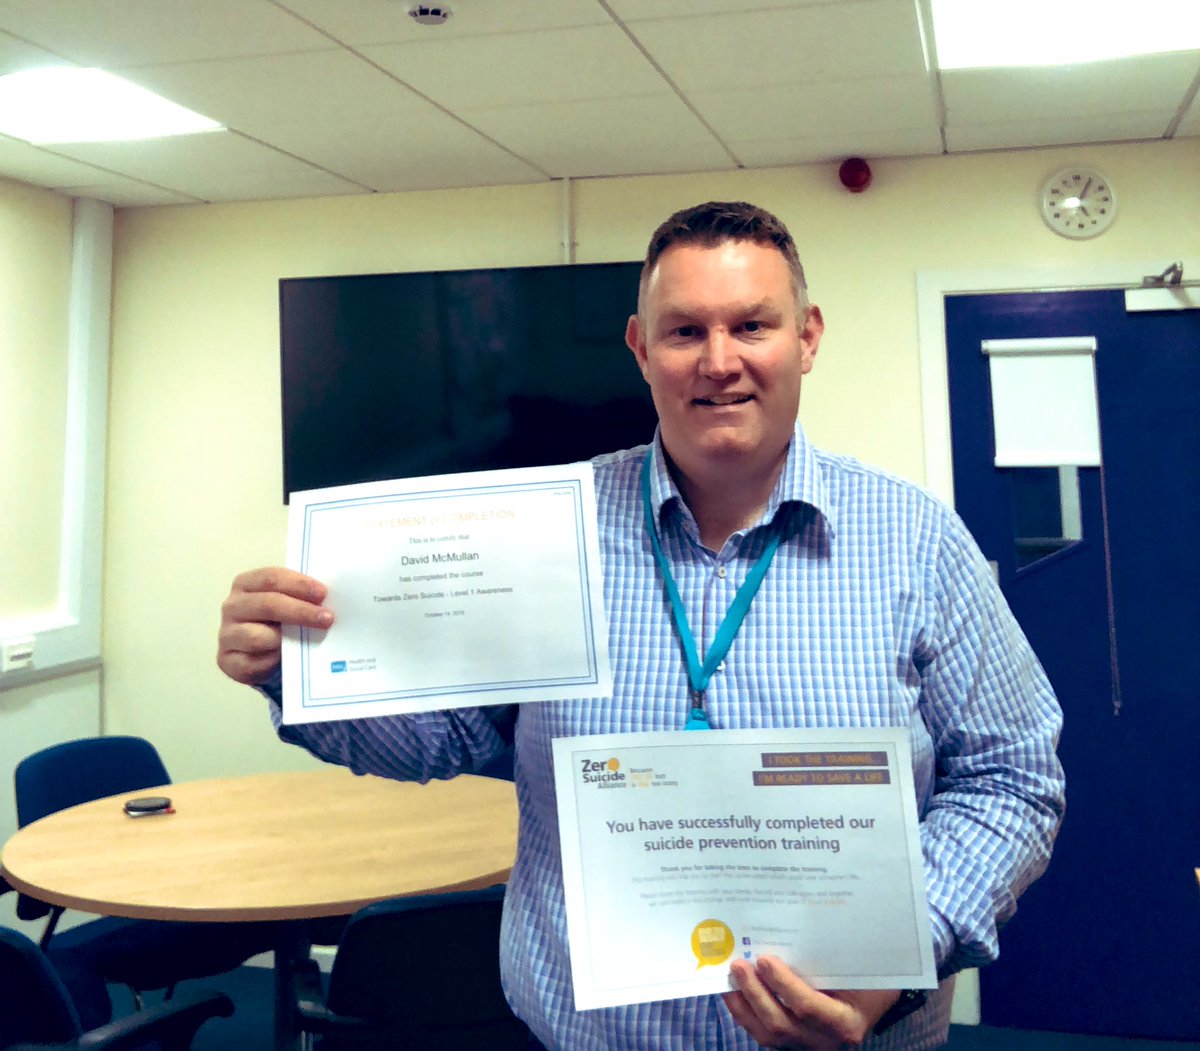 Completed the Towards #ZeroSuicide Level 1 training this week. I would recommend everyone does this. 20mins well spent. One life lost is one too many. Available to all HSC staff on e-learning. @donnelly_oscar  #SeeSaySignpost #Suicide #ItsOkToNotBeOk #Compassion #MentalHealth